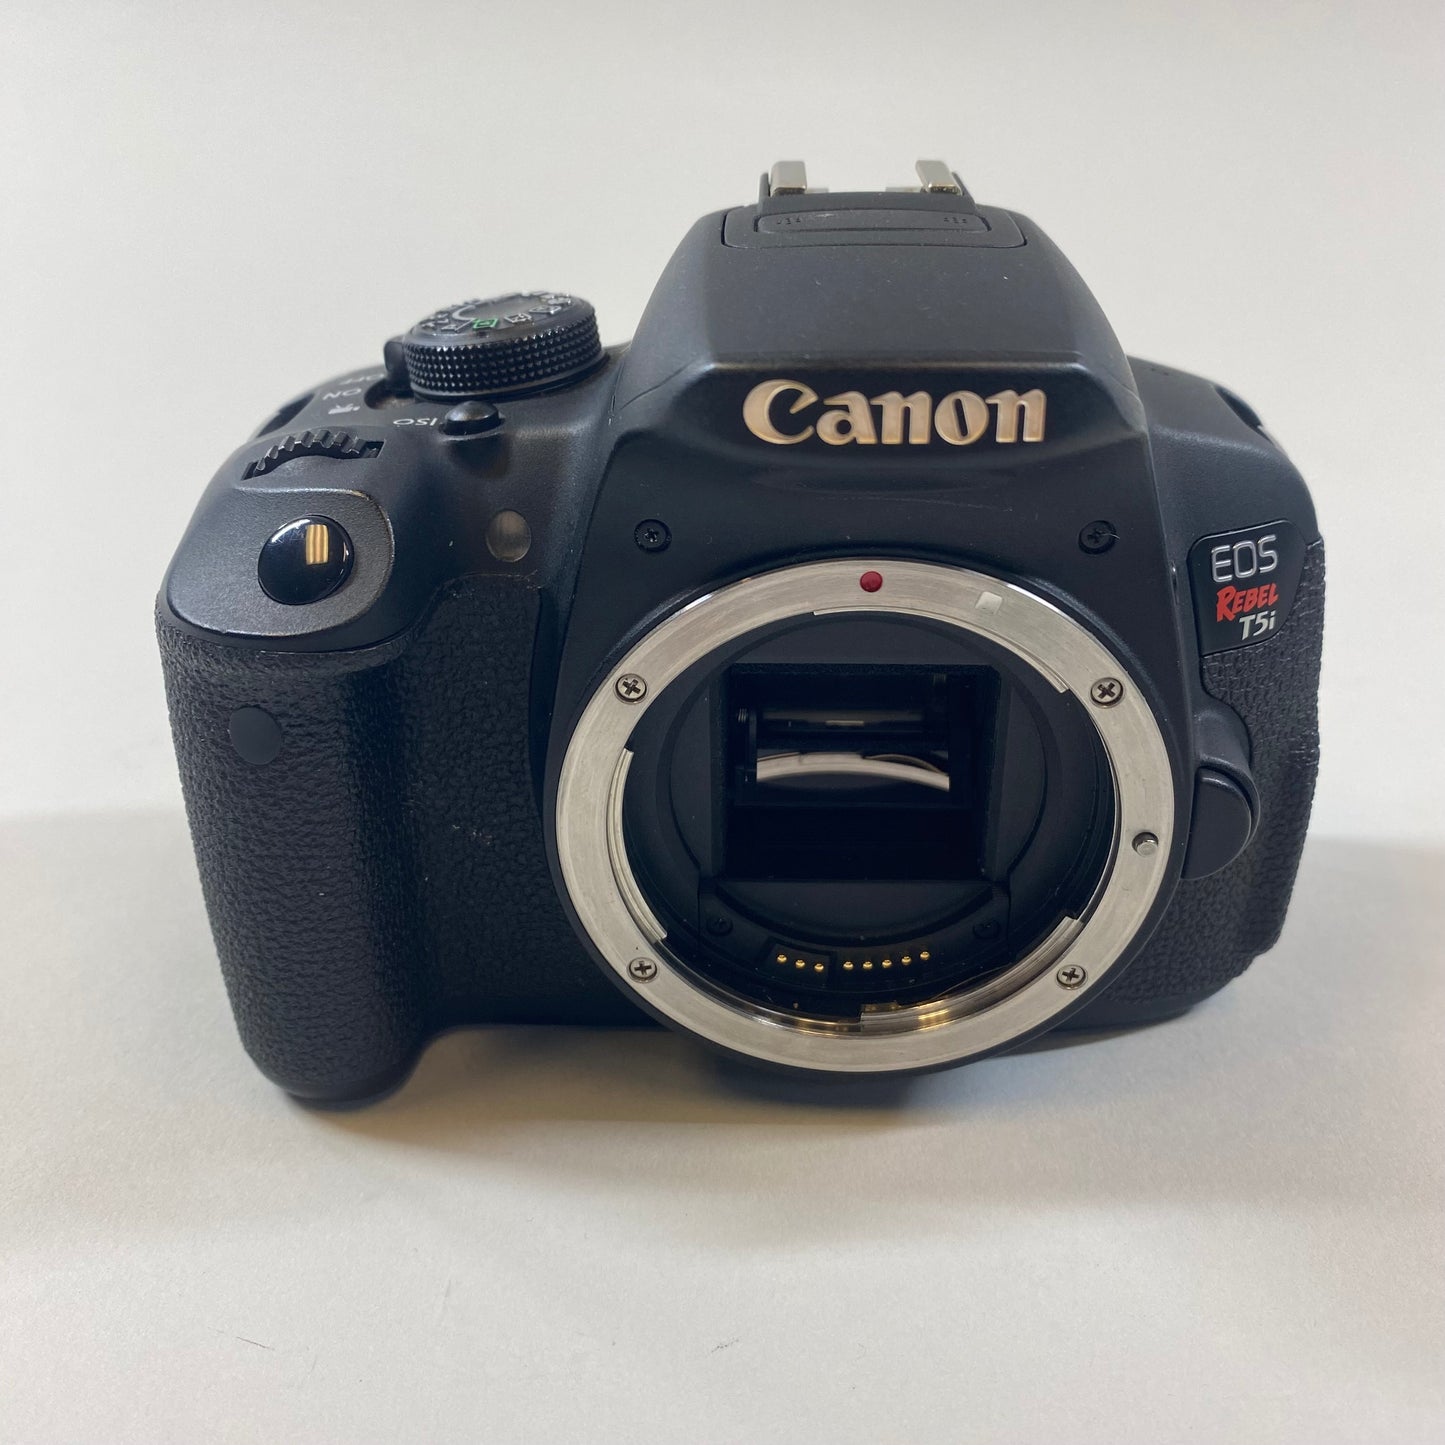 Canon EOS Rebel T5i 18.0 MP Digital SLR DSLR Camera with Neewer Battery Grip